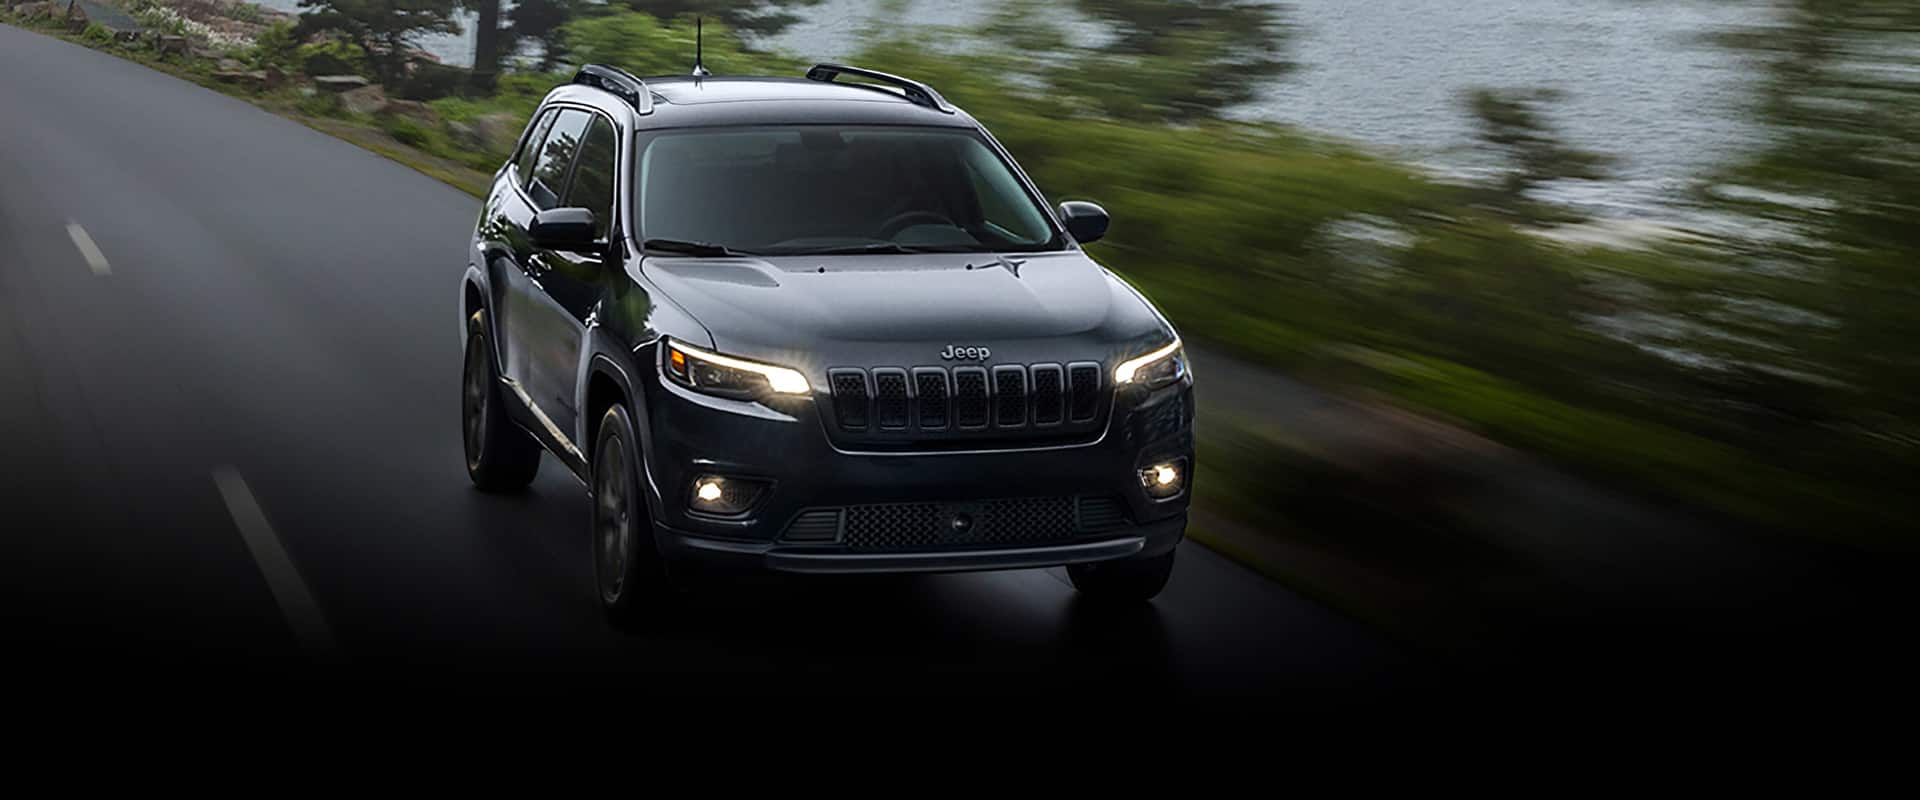 How to Easily Unlock Jeep Cherokee With Keys Inside: Ultimate Guide